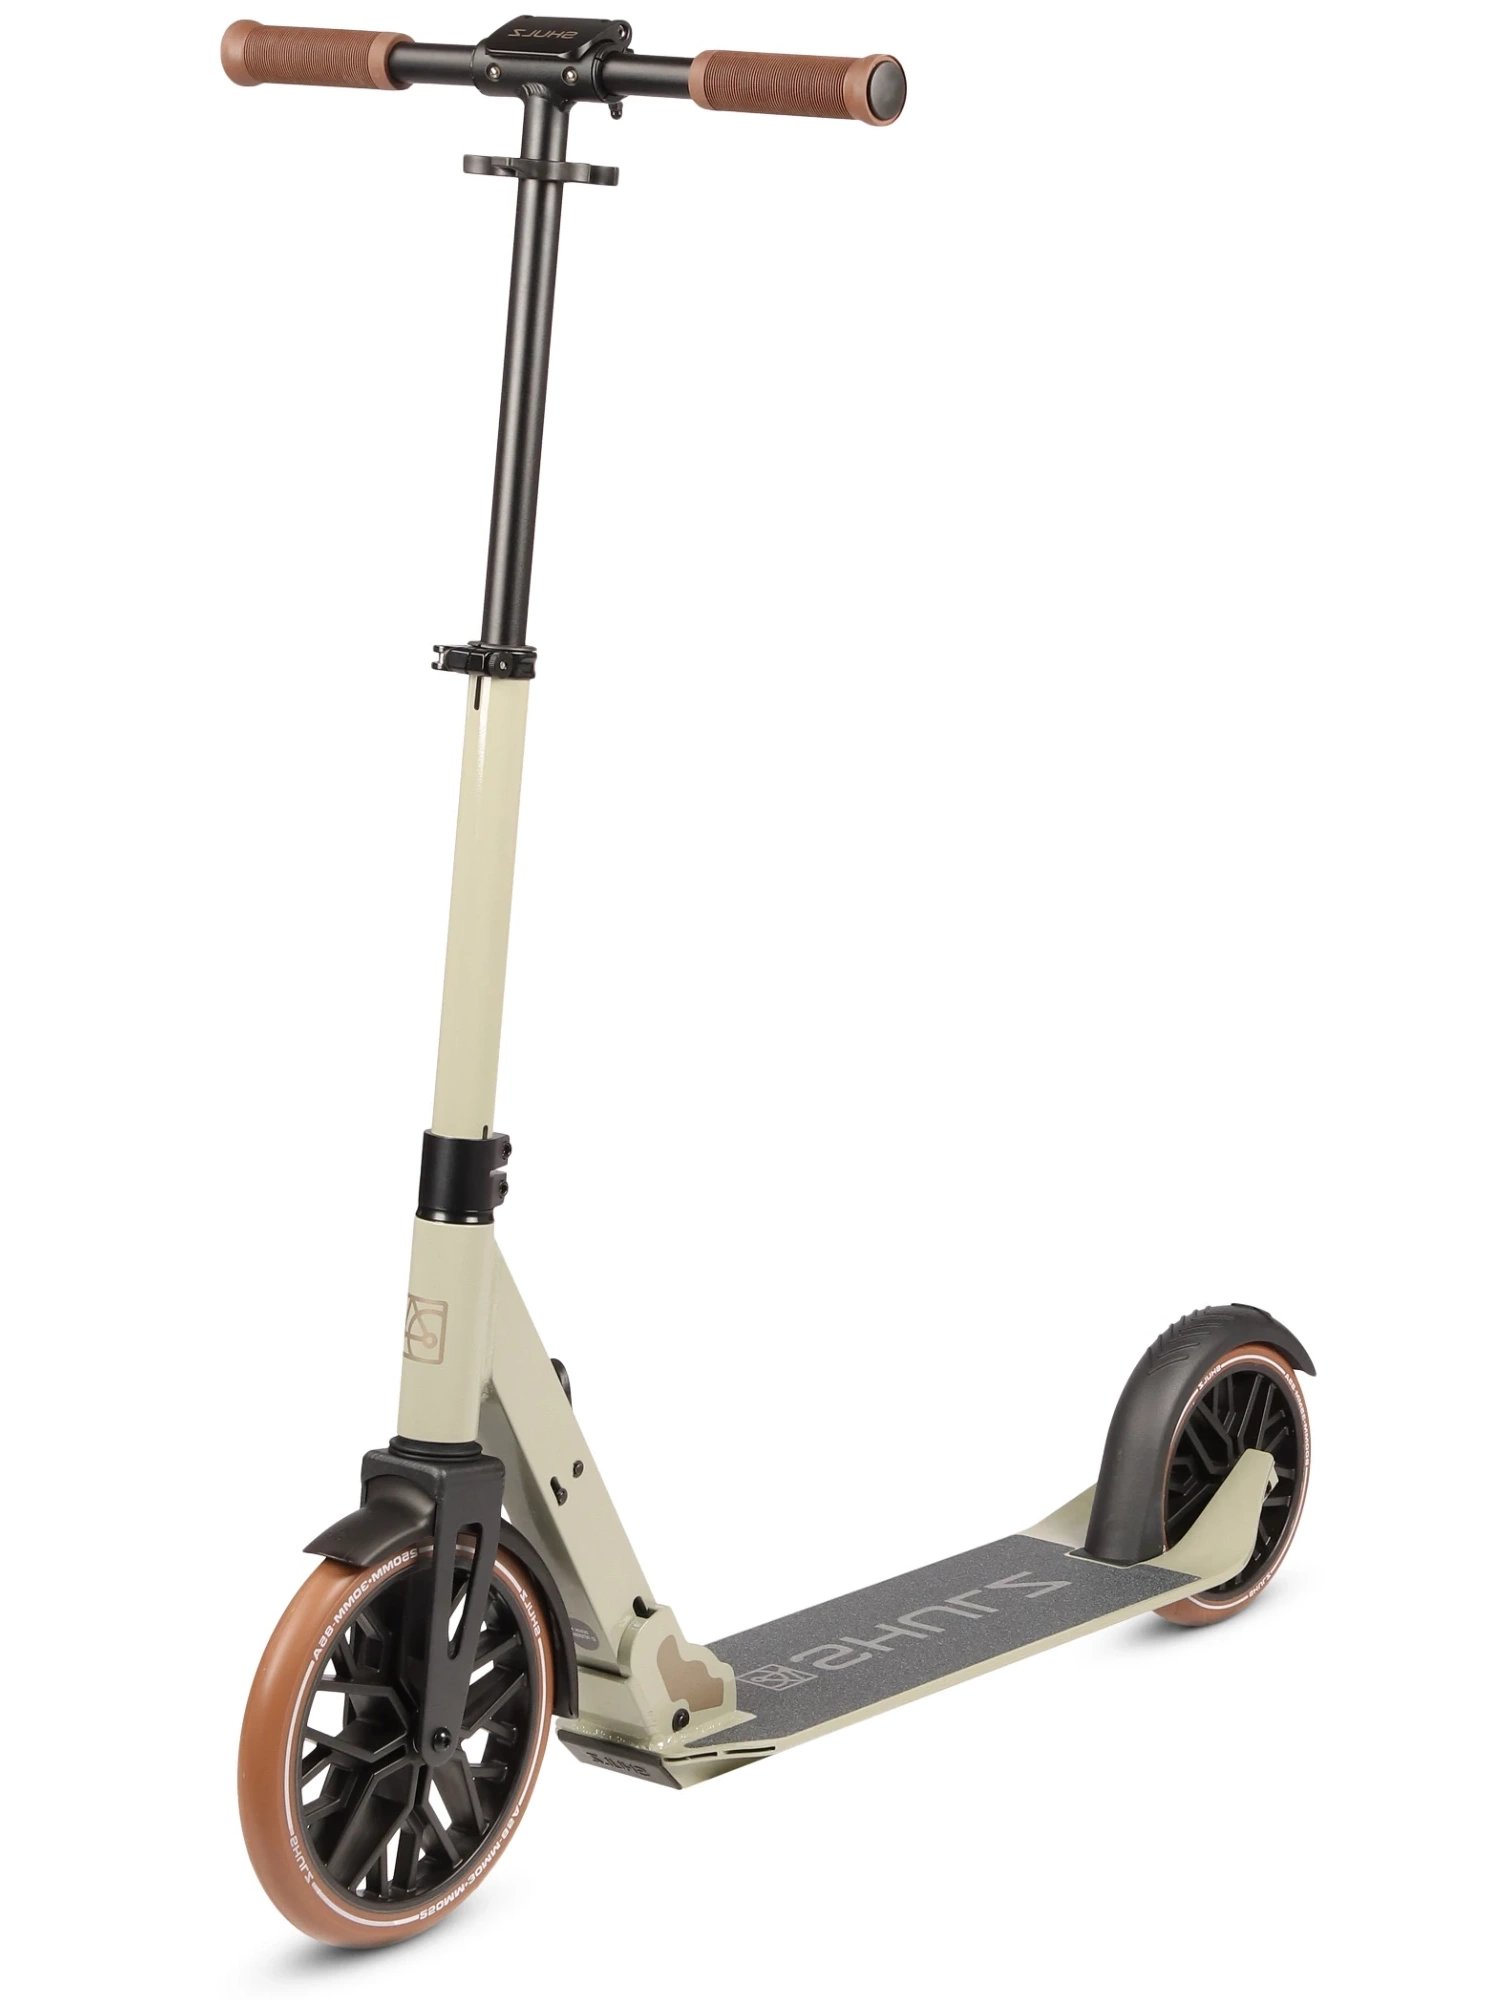 Shulz 250 Speed Scooter